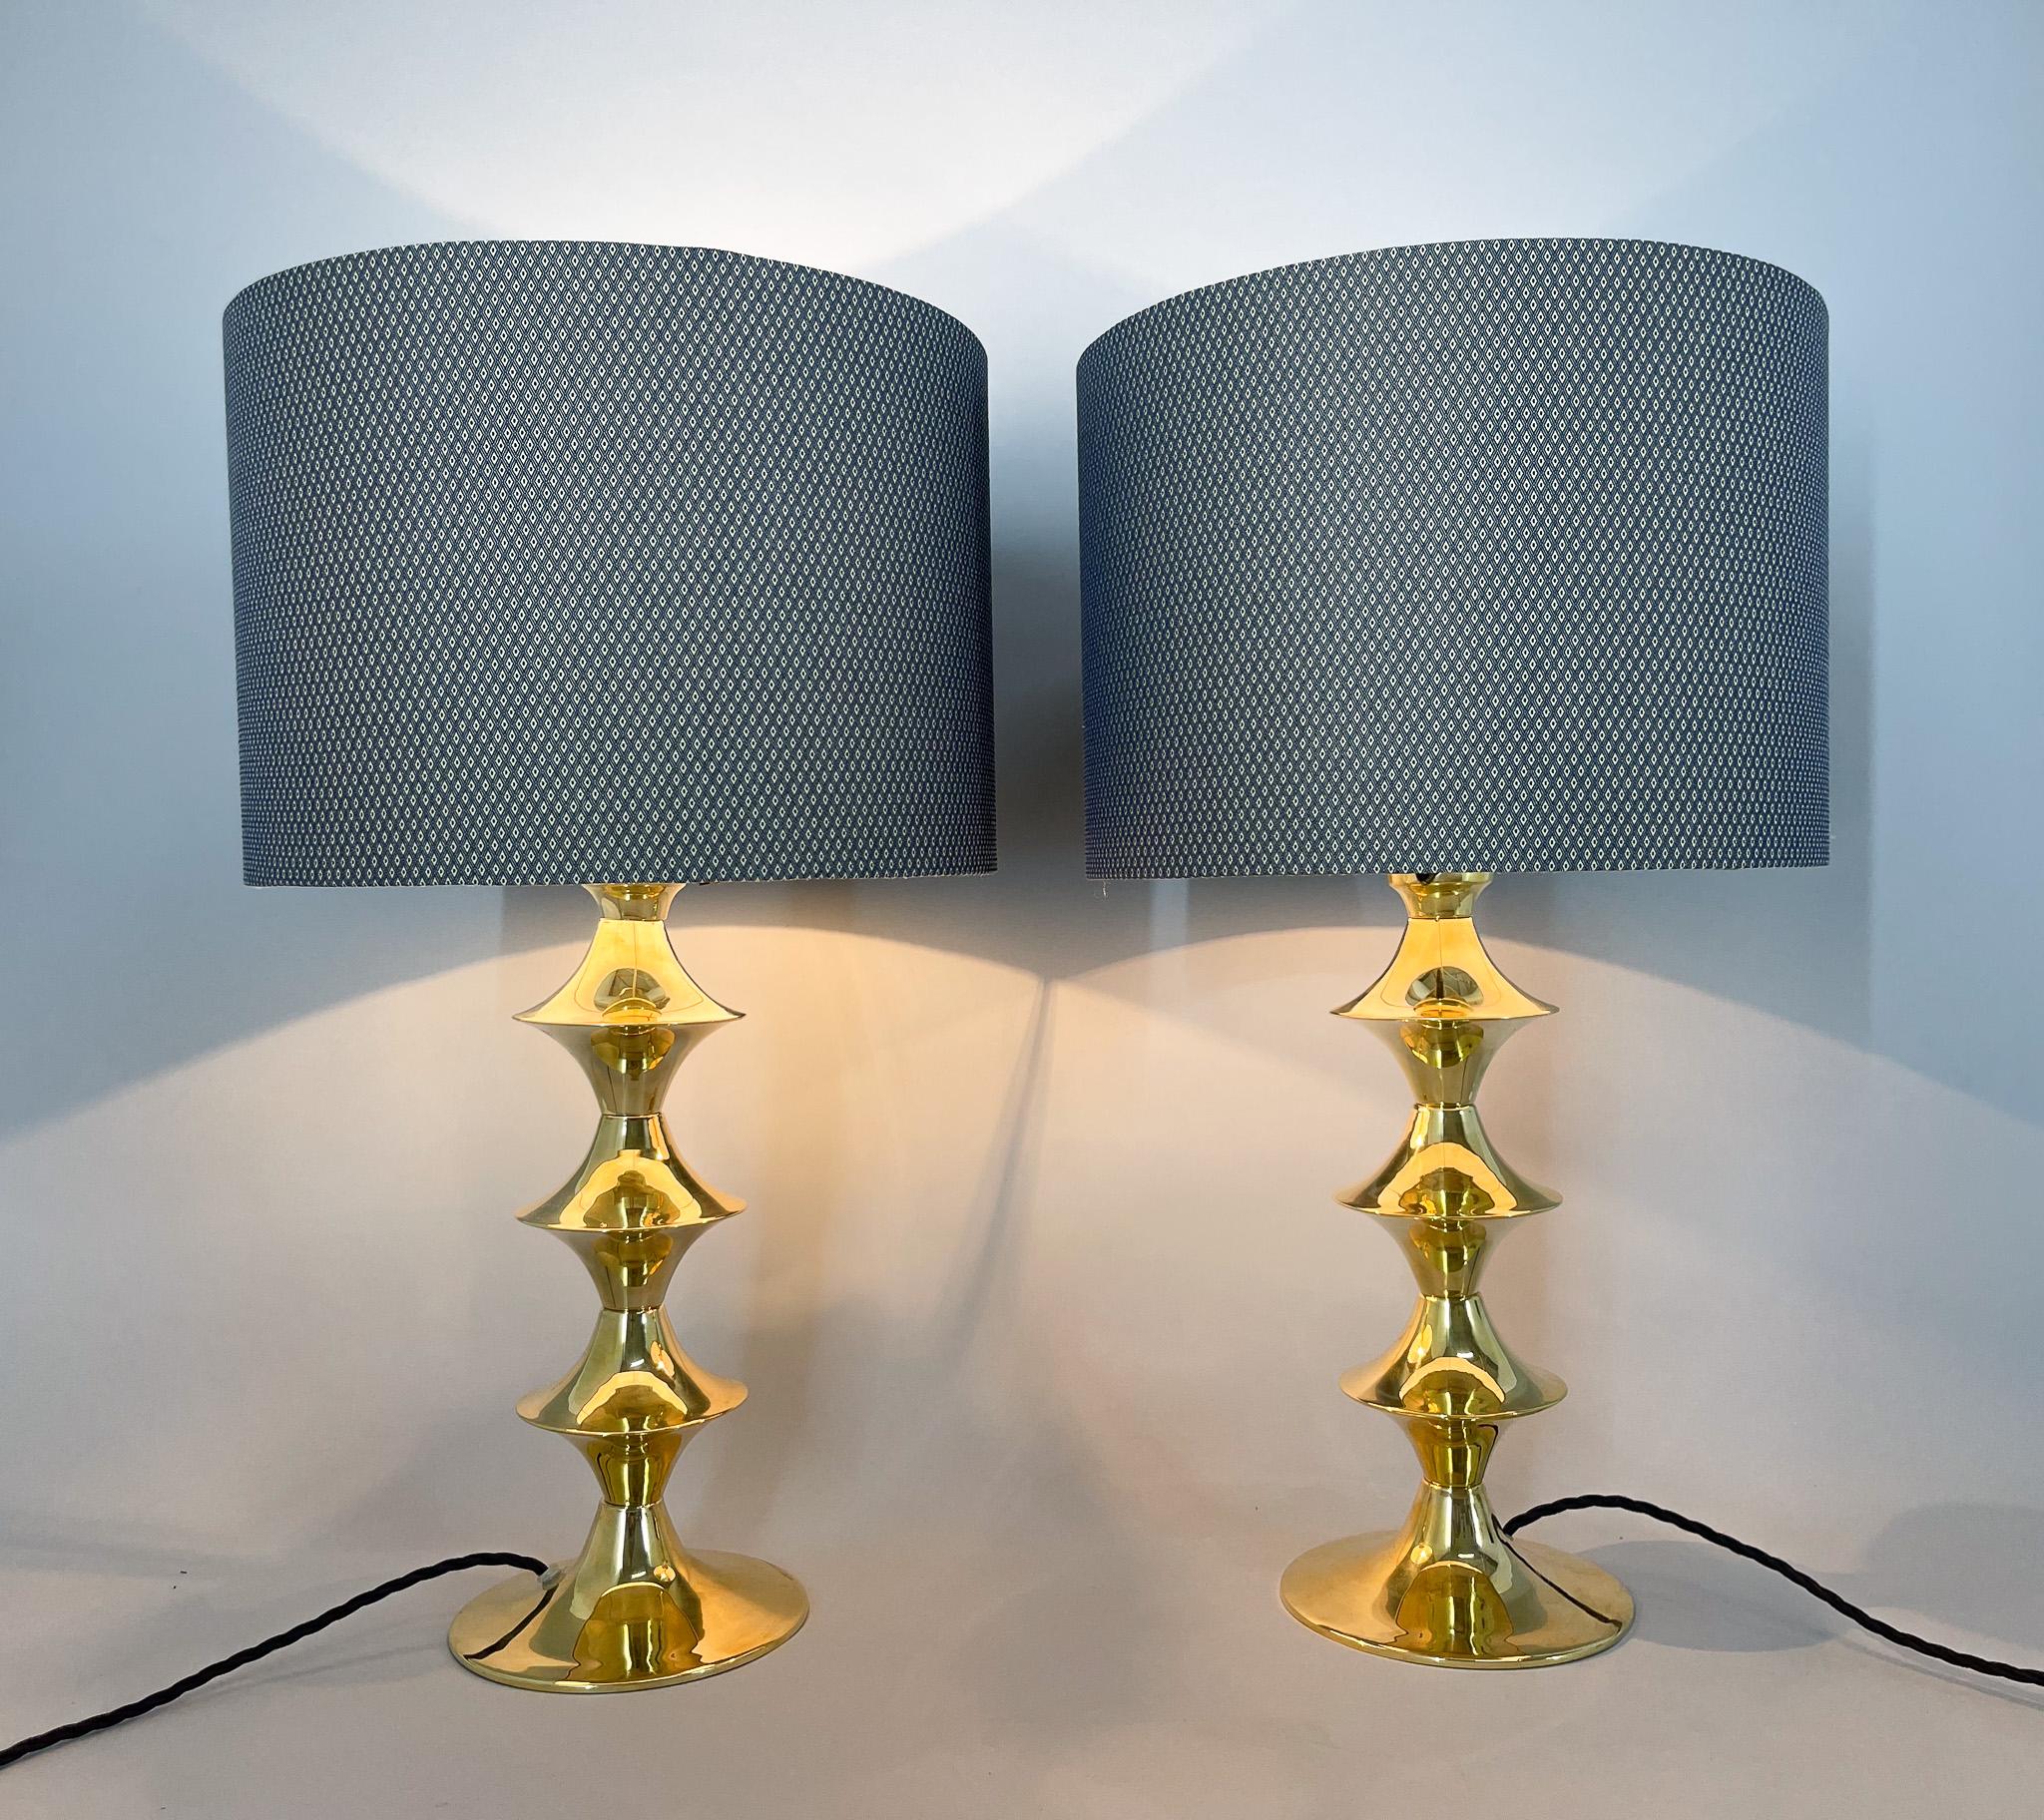 Set of two vintage tall table lamps with all-brass base and rotary switch. The lamps was restored, have new wiring and new handmade lamp shades. Bulb: 1 x E25-E27. US plug adapter included.